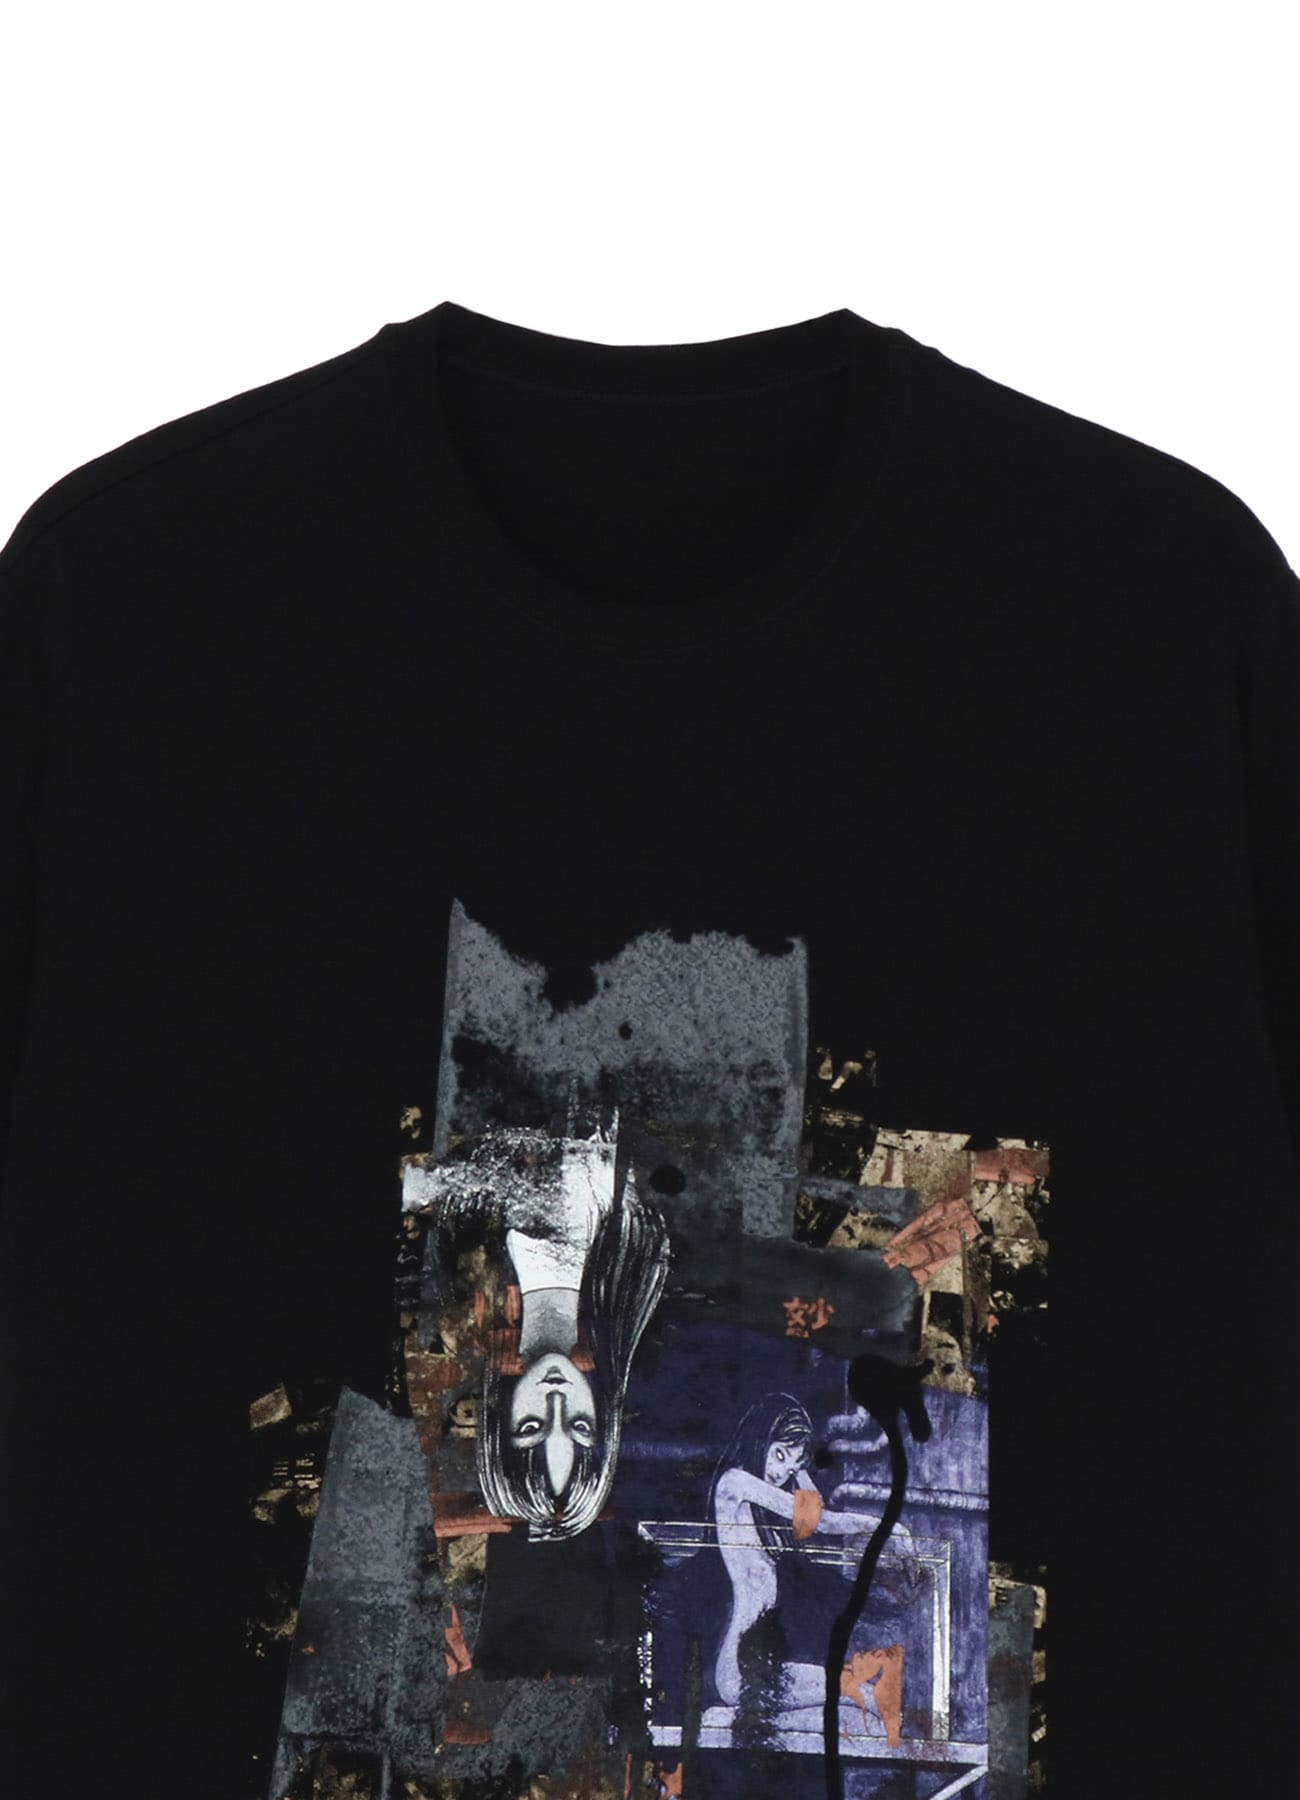 "Tomie" Masterpiece Collection Cover T-shirt